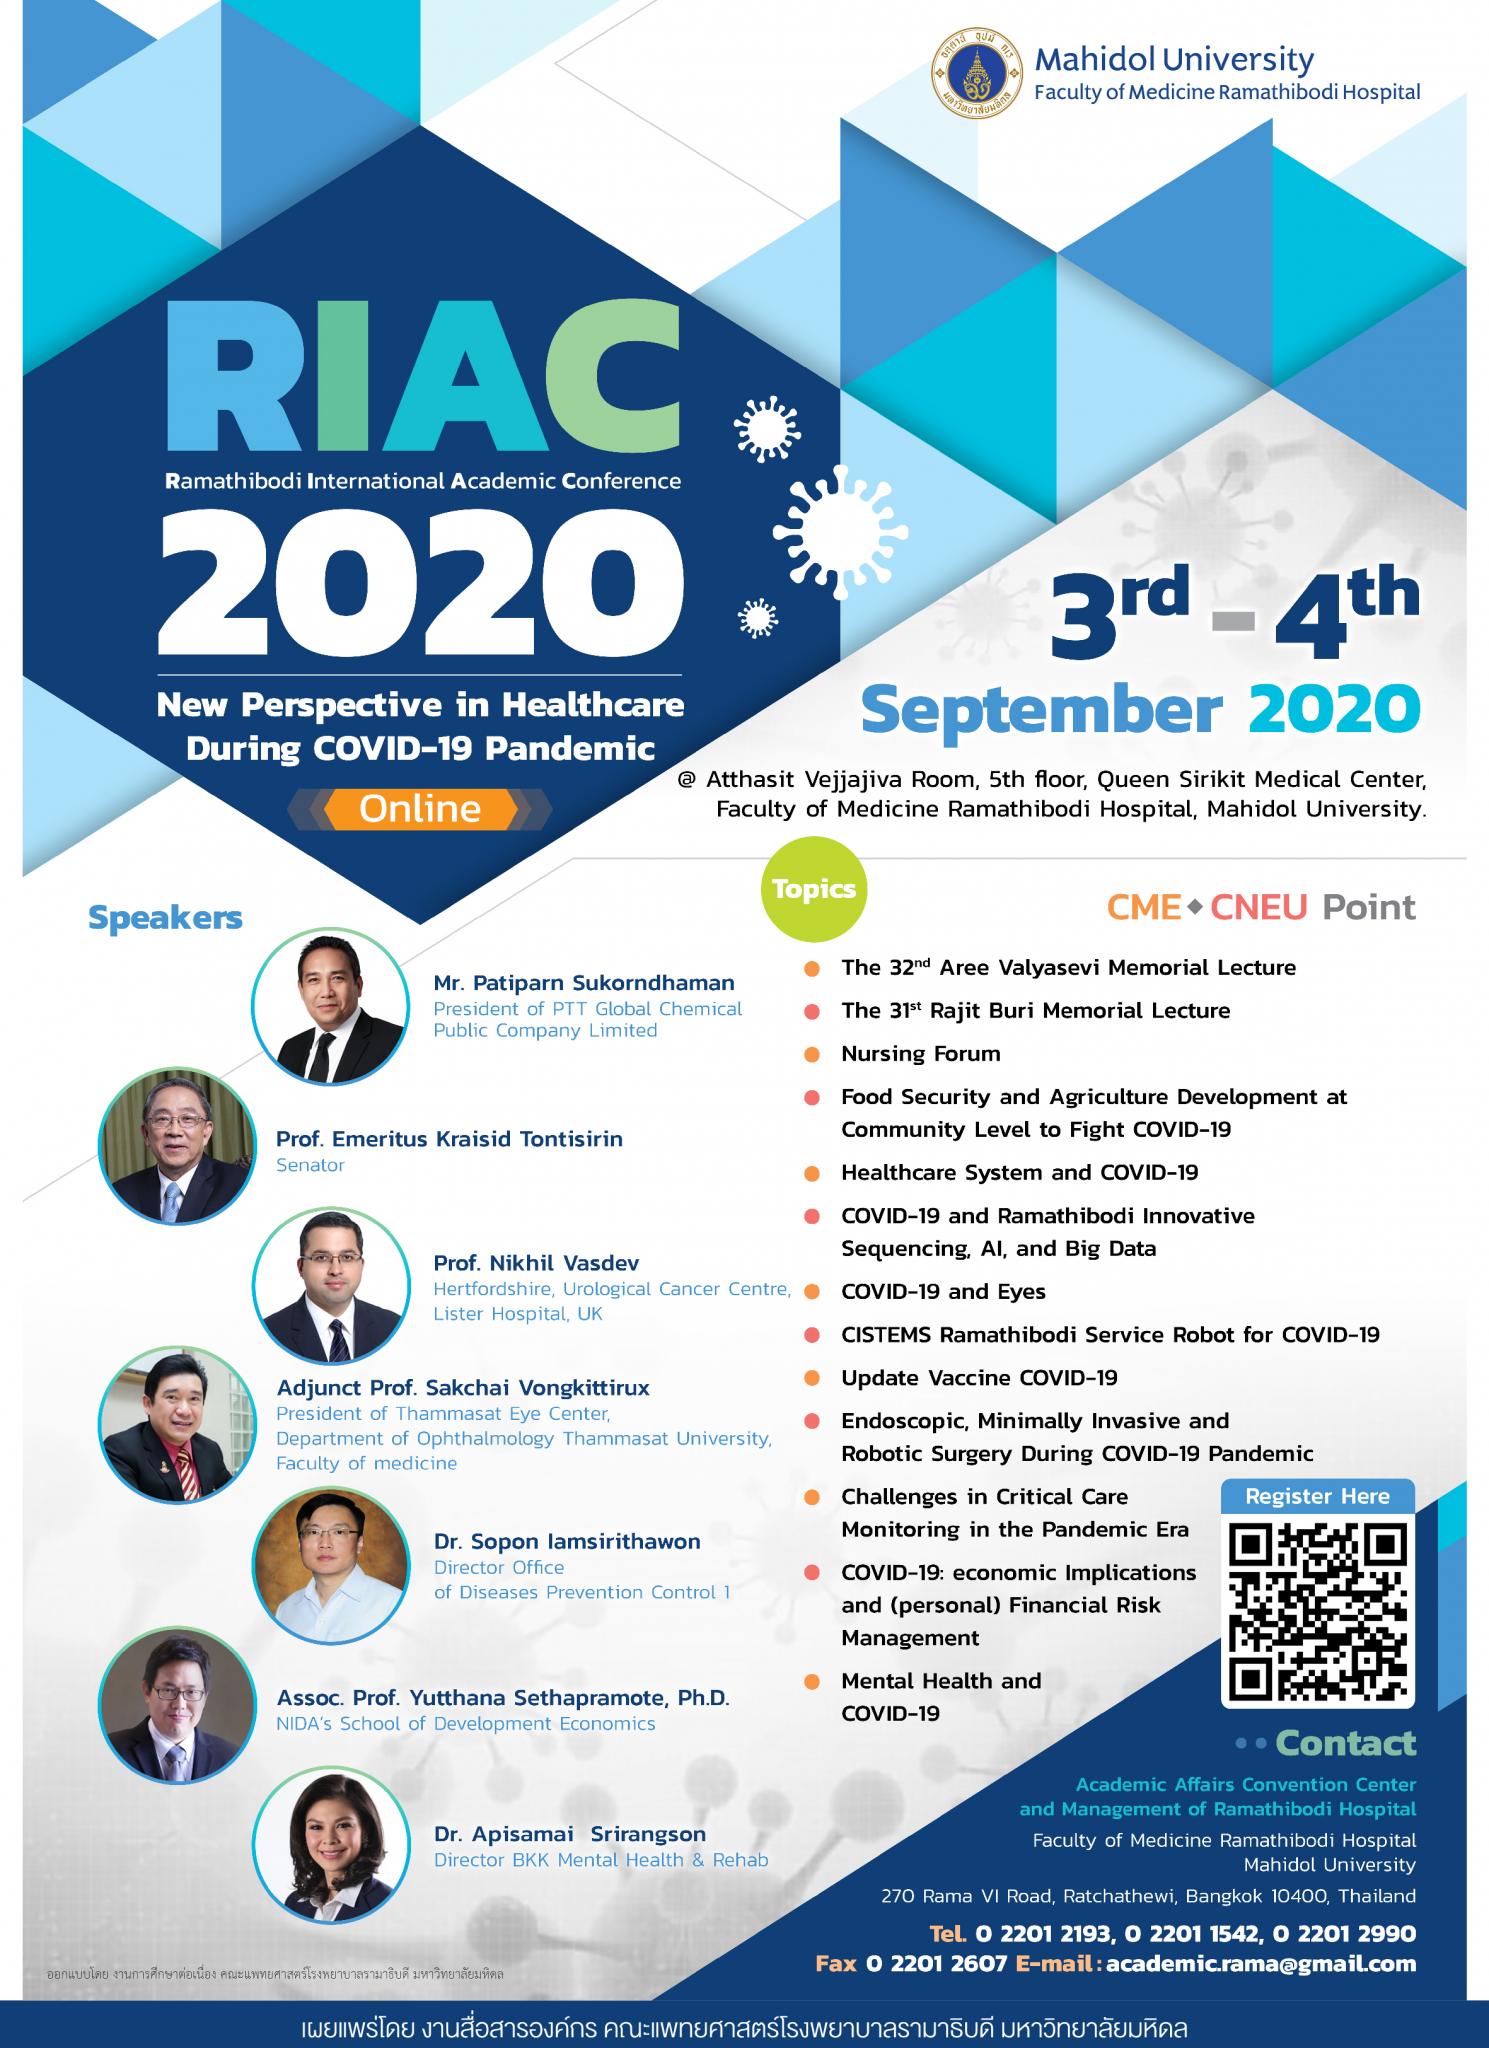 RIAC 2020 New Perspective in Healthcare During COVID-19 Pandemic